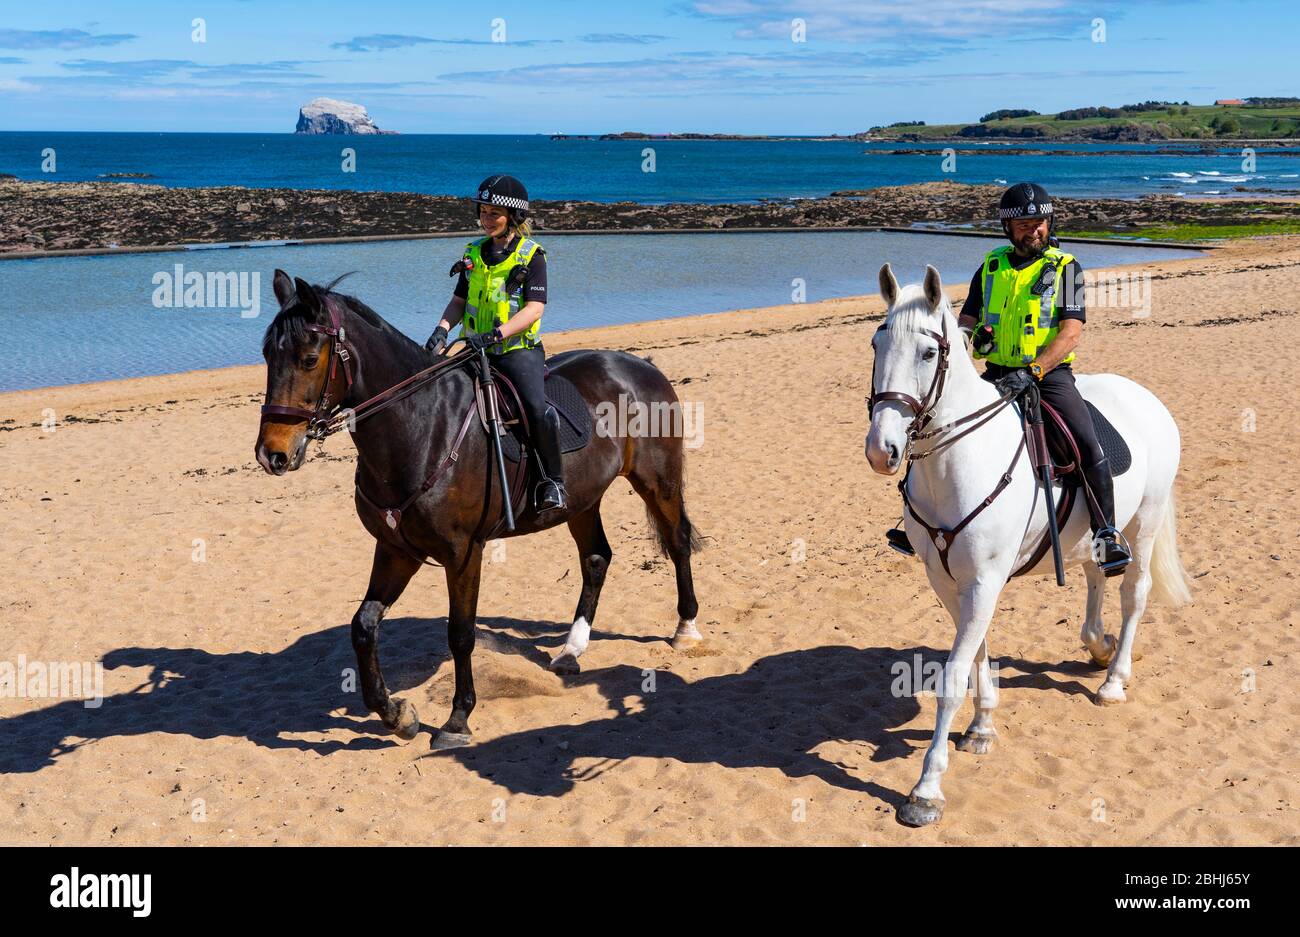 North Berwick, Scotland, UK. 26 April 2020. Mounted police patrolling the beaches of North Berwick in East Lothian this afternoon. Horses Inverness (dark) and Edinburgh travelled from their stables in Stewarton in Ayrshire for today’s walk. However the beaches were very quiet and the horses’ main duty was to pose for photographs with the few people outdoors.  Iain Masterton/Alamy Live News Stock Photo